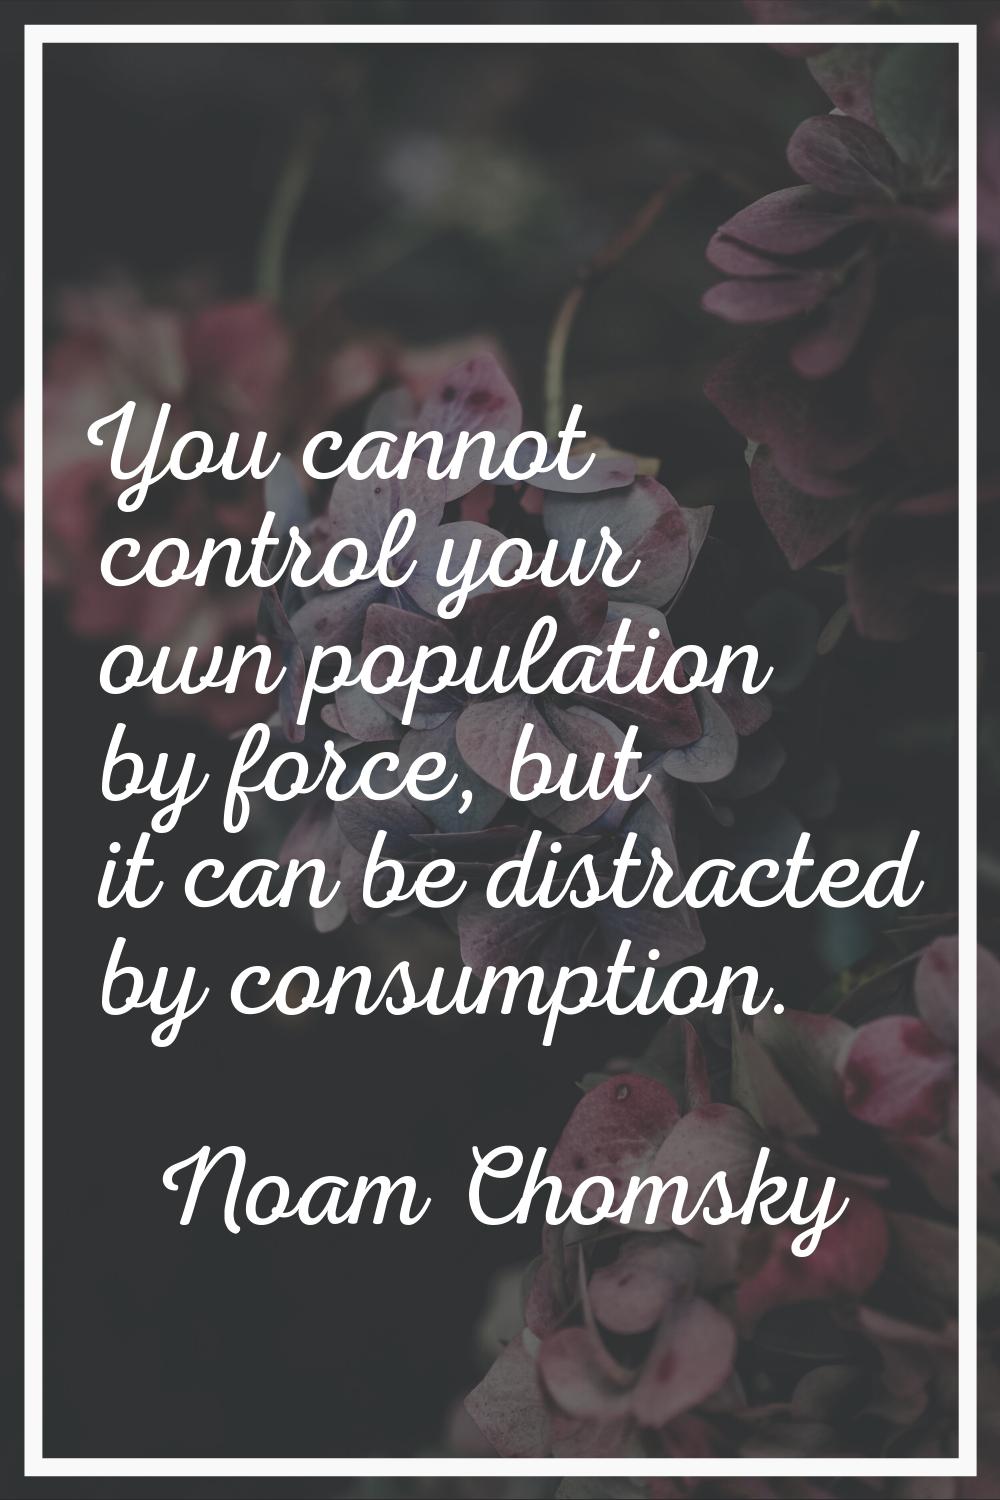 You cannot control your own population by force, but it can be distracted by consumption.